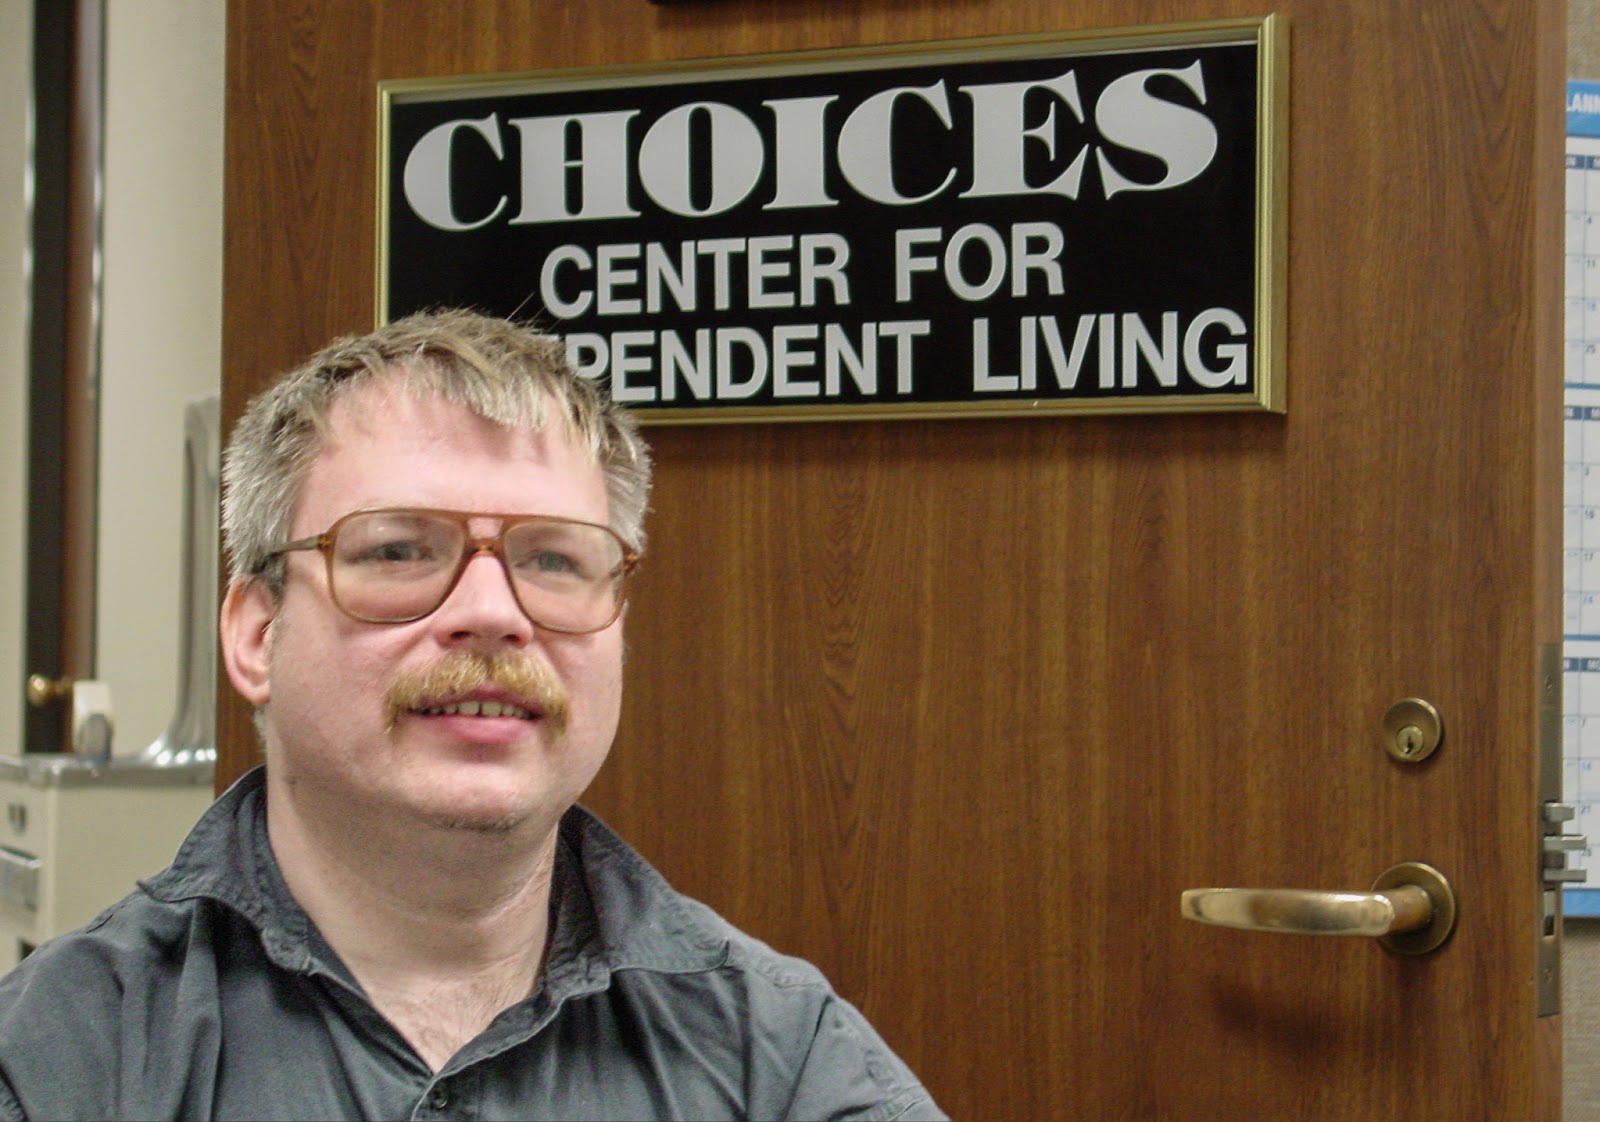 Man with mustache and glasses in front of a sign that reads: CHOICES CENTER FOR INDEPENDENT LIVING.